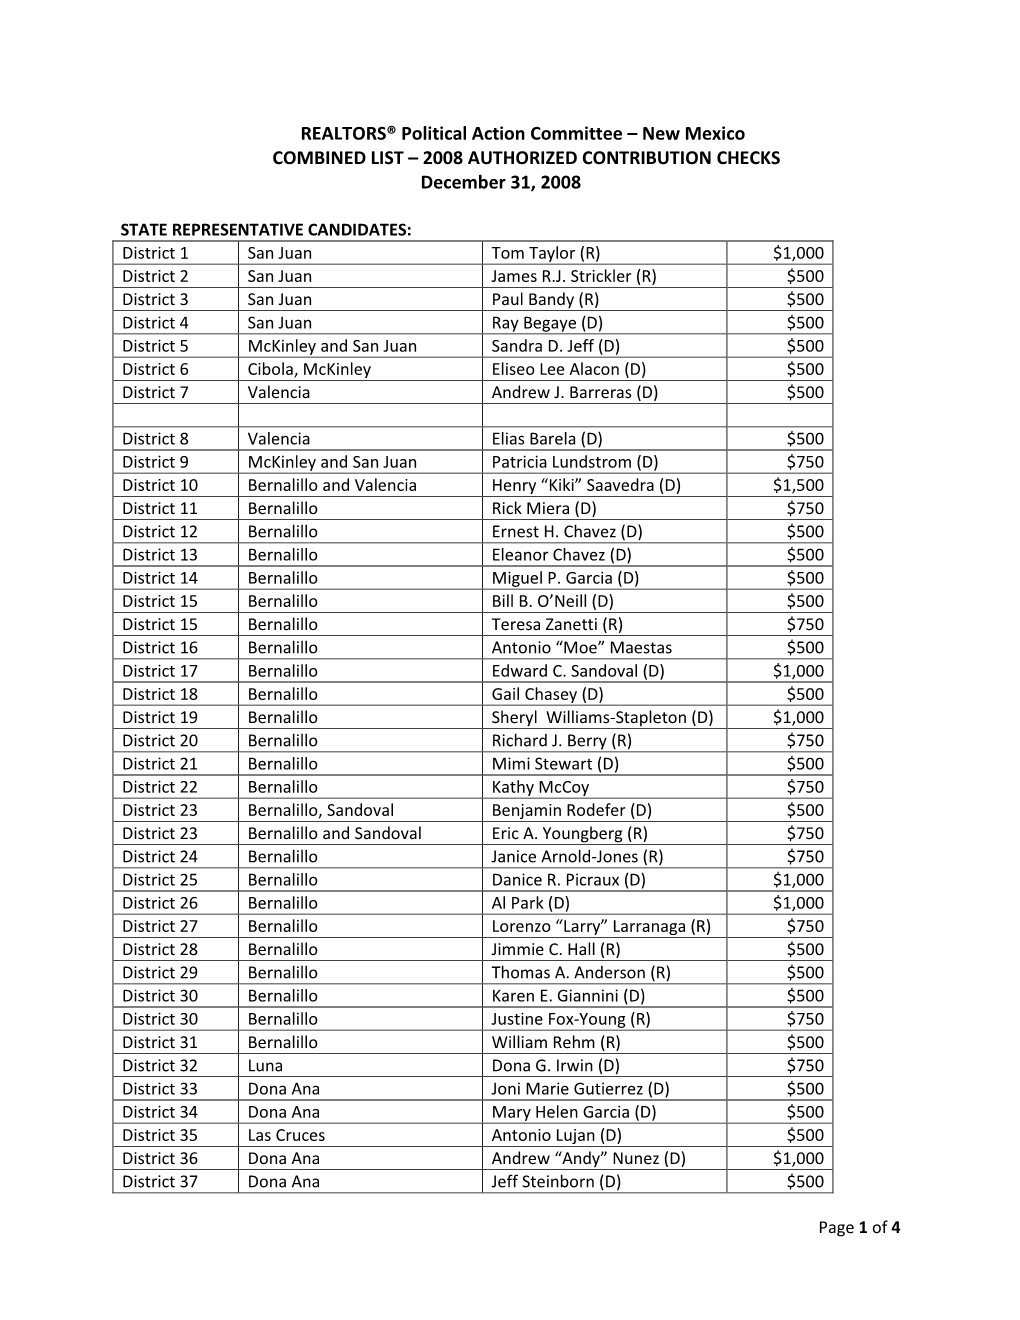 REALTORS® Political Action Committee – New Mexico COMBINED LIST – 2008 AUTHORIZED CONTRIBUTION CHECKS December 31, 2008